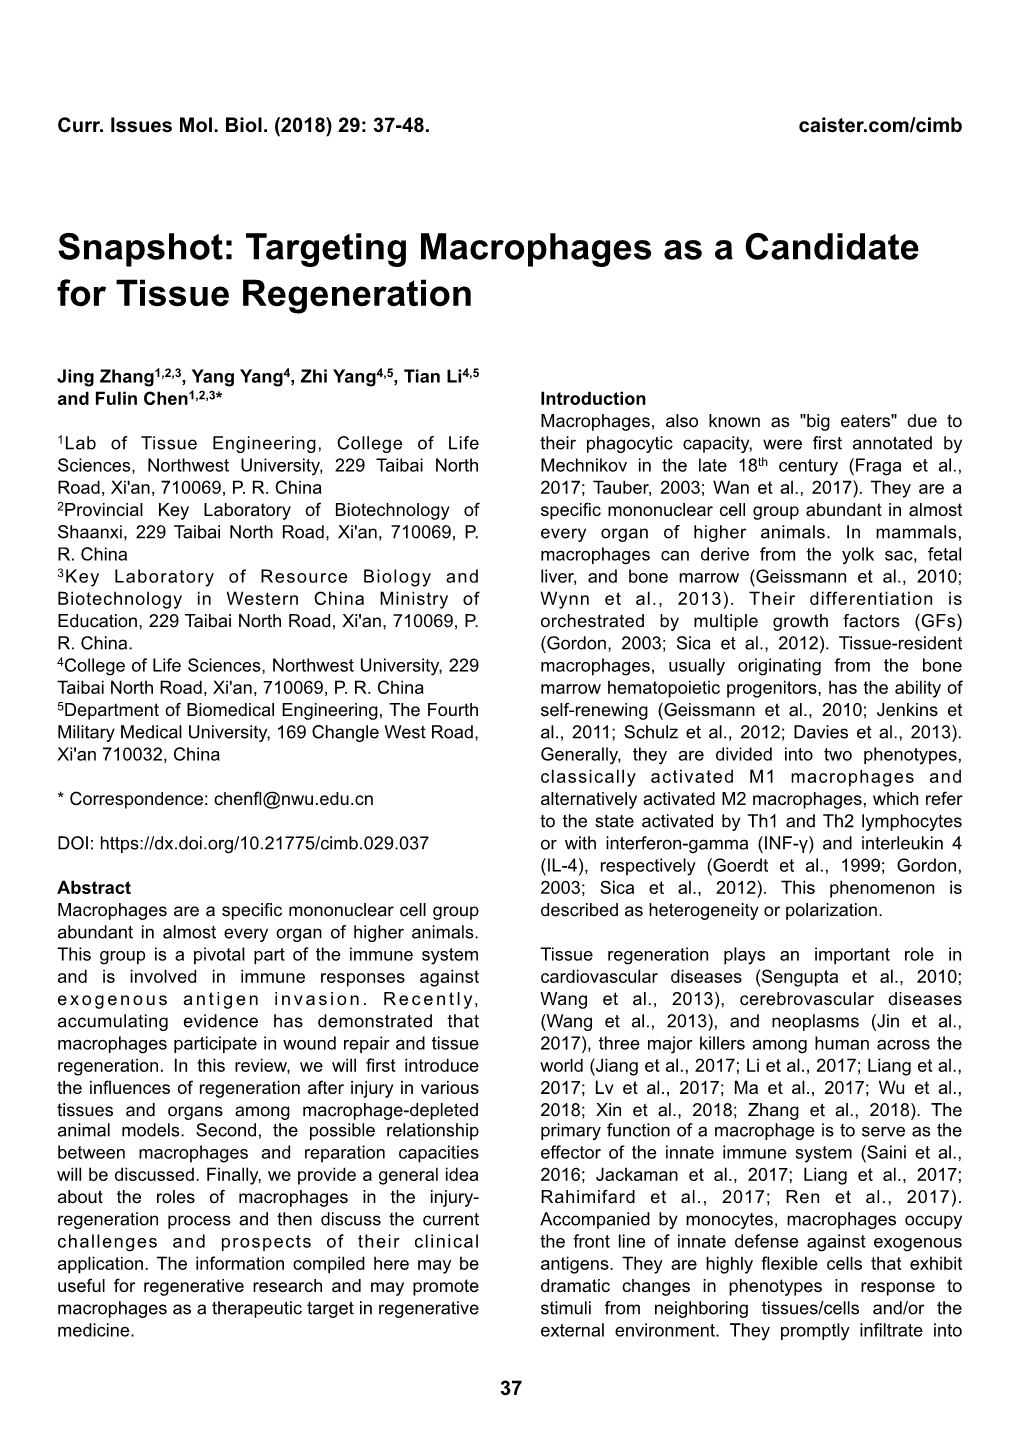 Targeting Macrophages As a Candidate for Tissue Regeneration